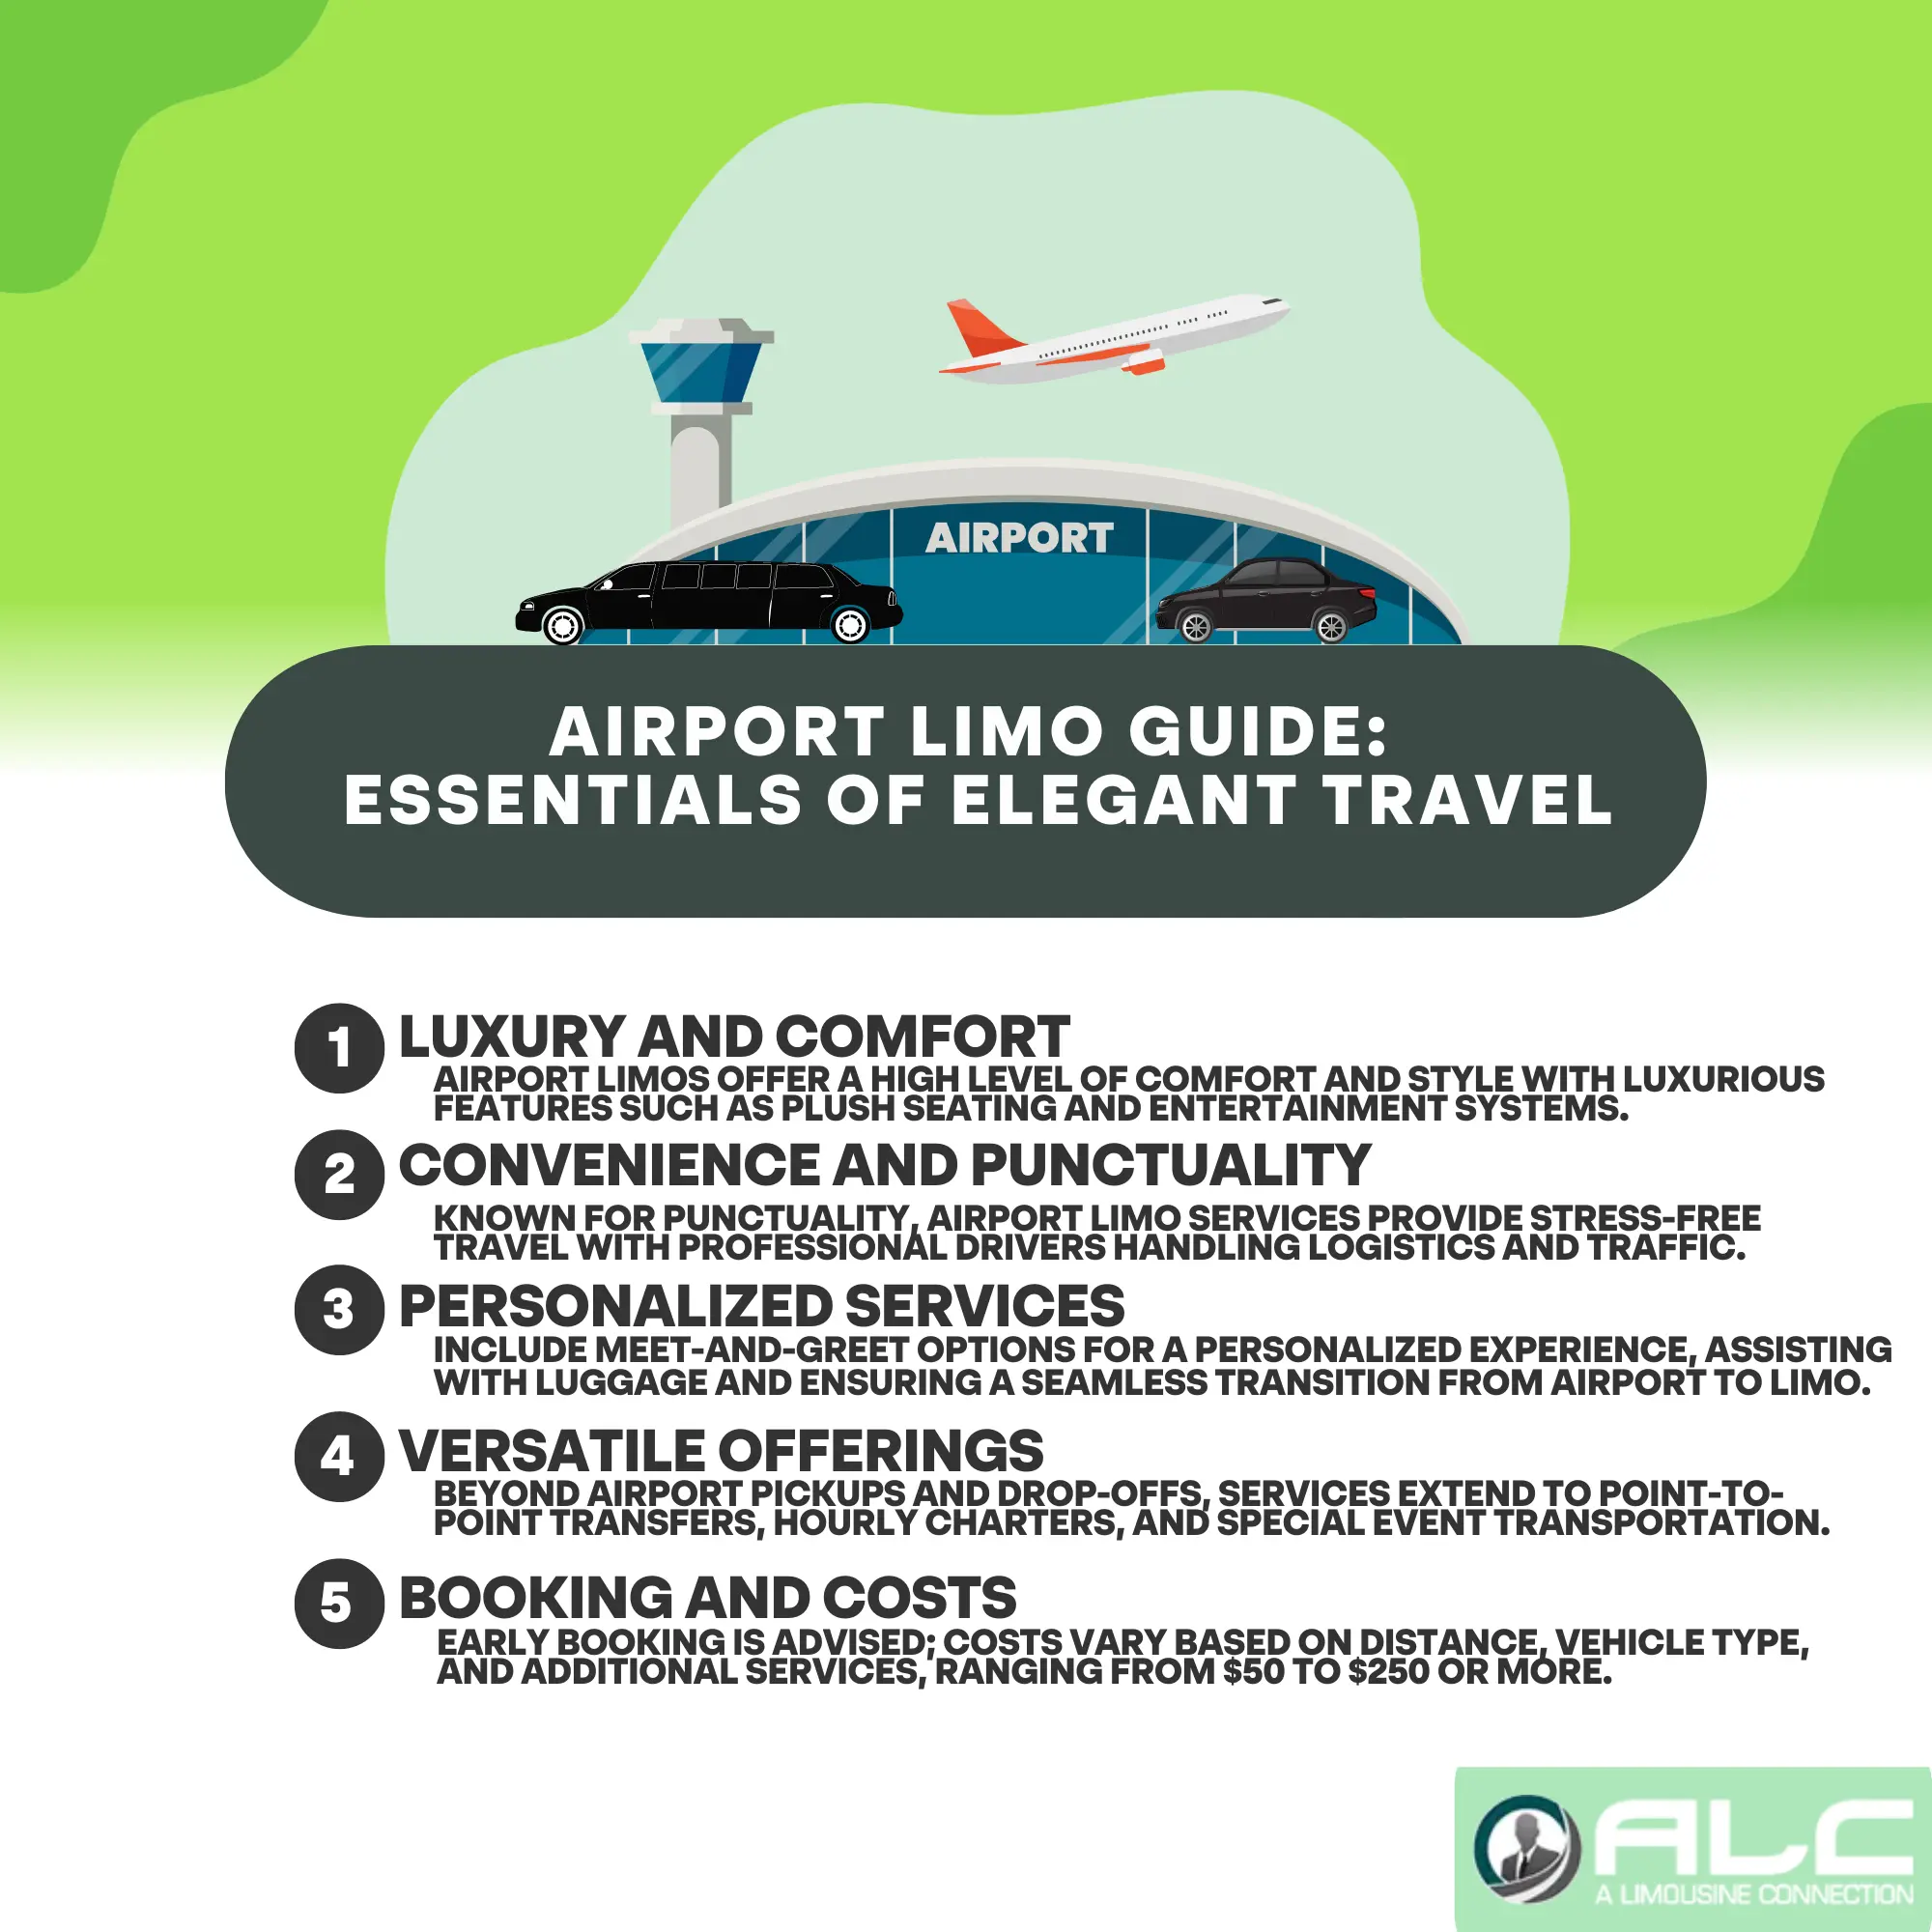 Airport Limo 101: What You Need to Know About Elegant Travel | ALC